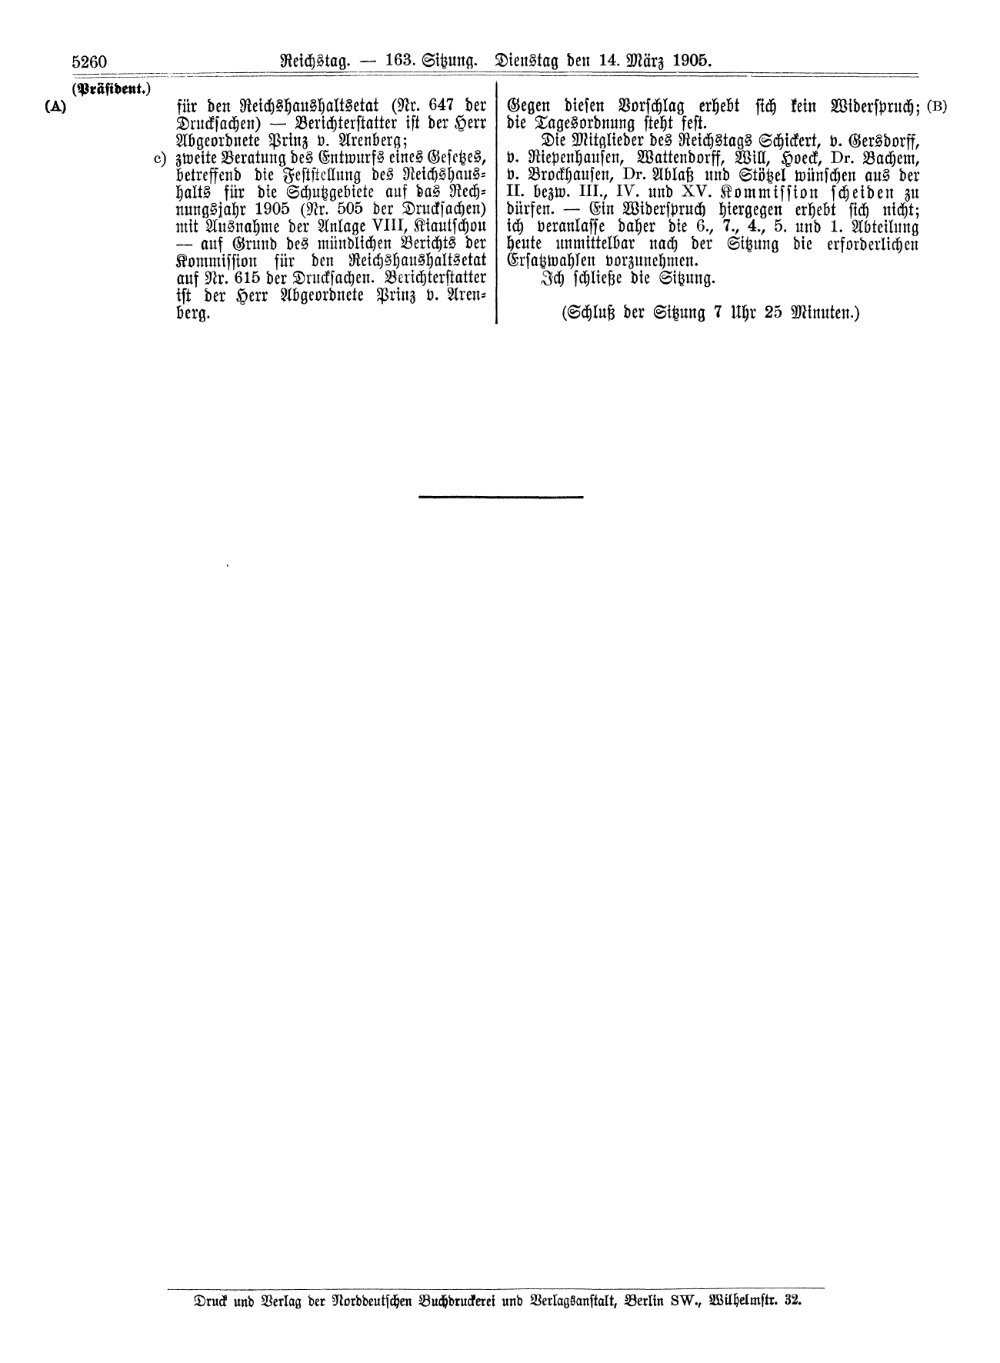 Scan of page 5260